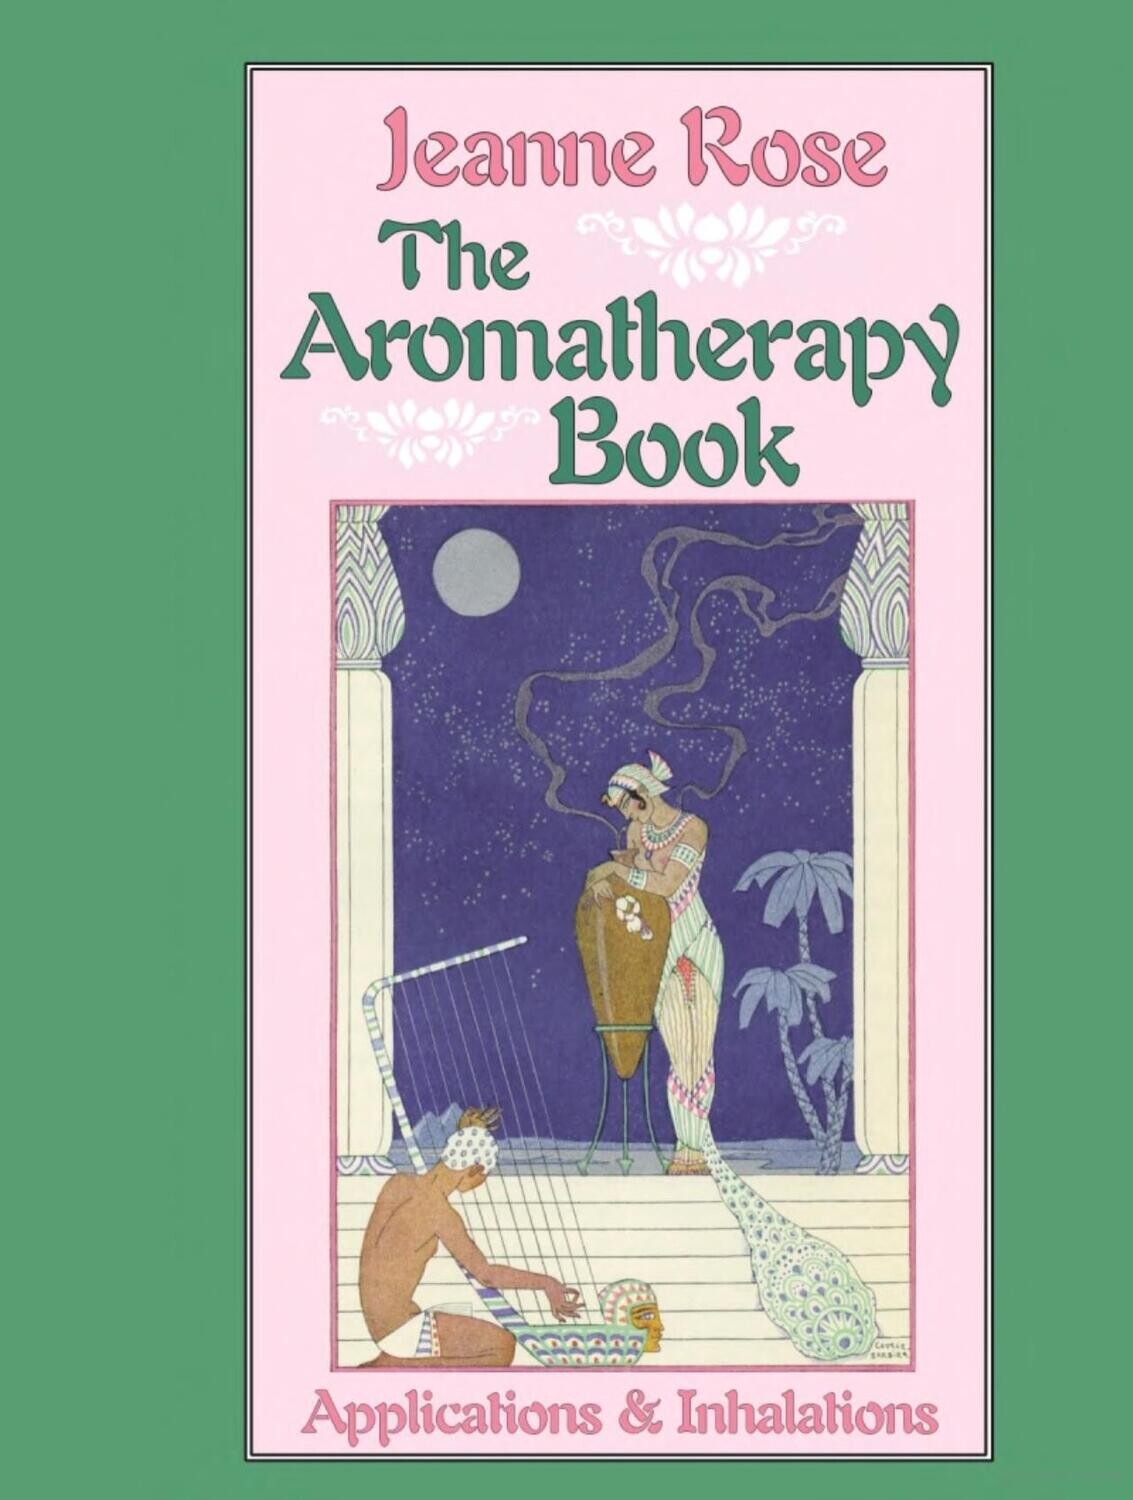 The Aromatherapy Book by Jeanne Rose